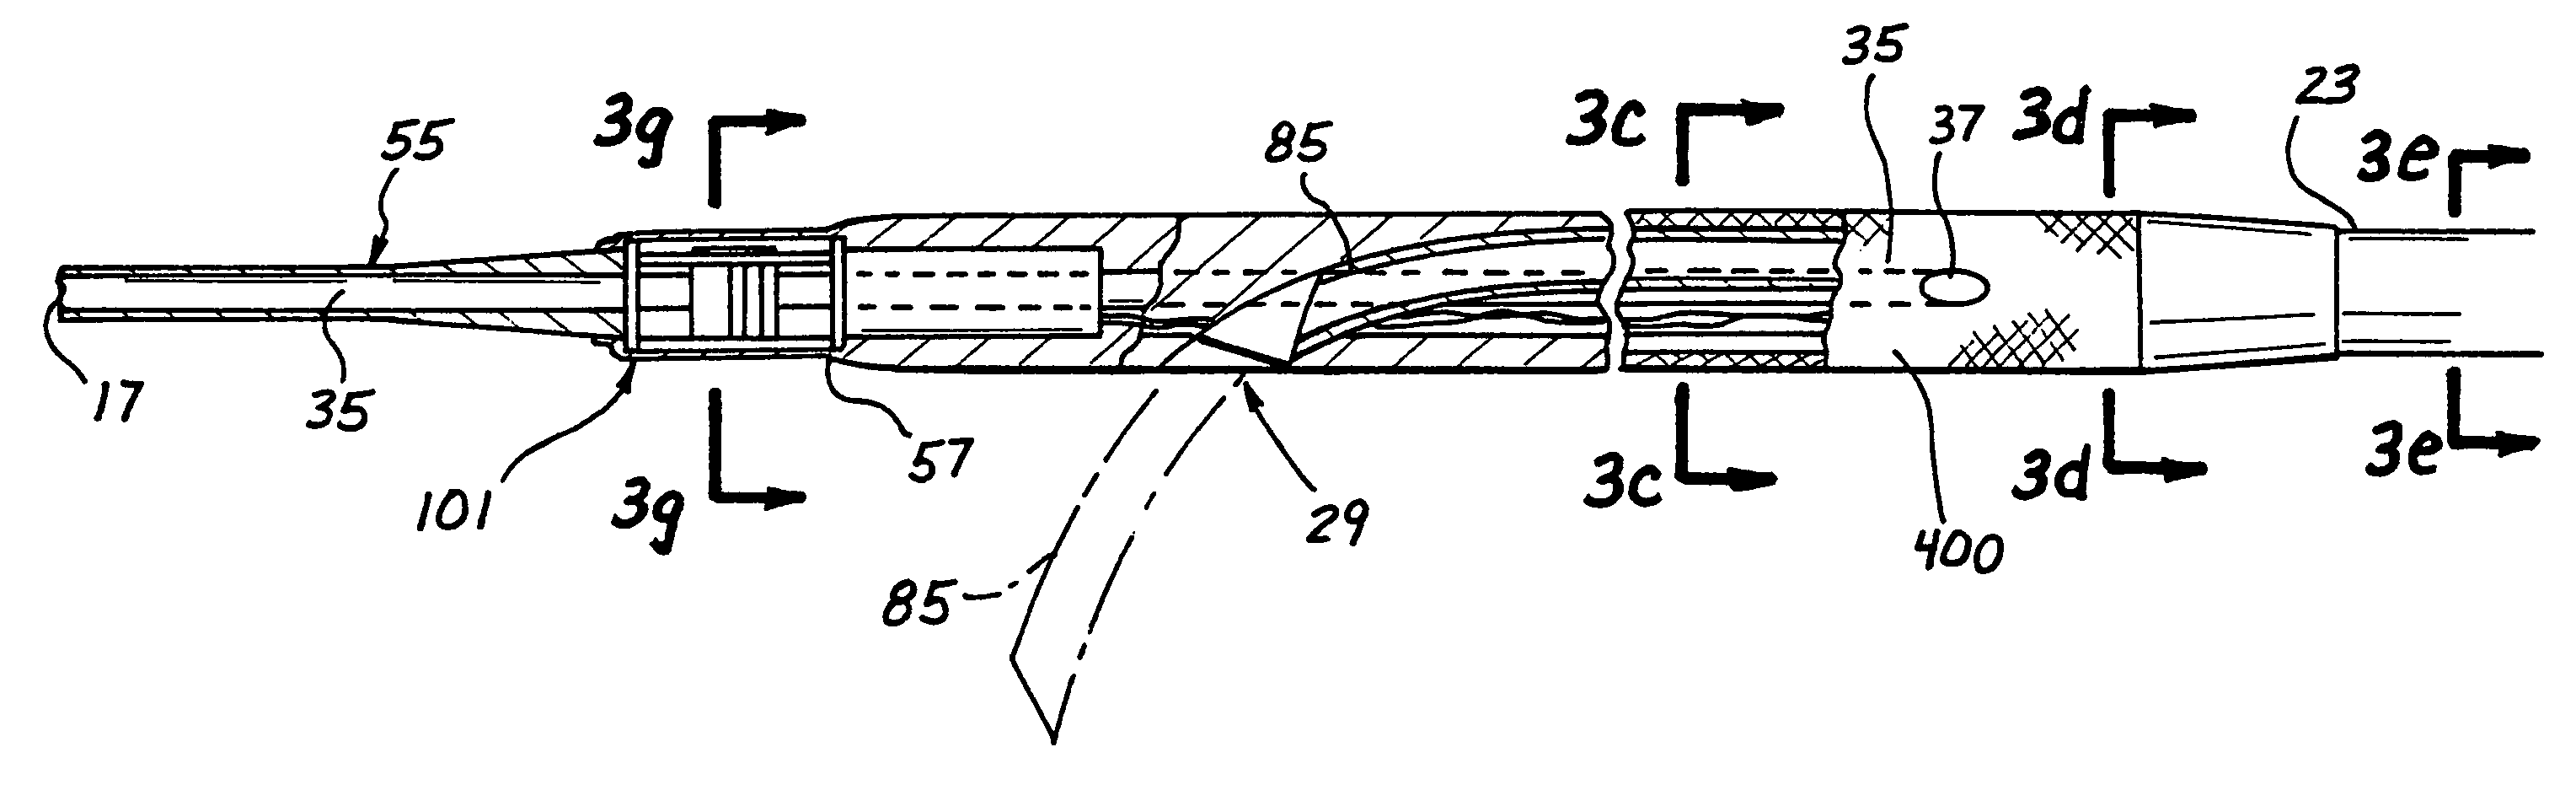 Tissue penetrating catheters having integral imaging transducers and their methods of use